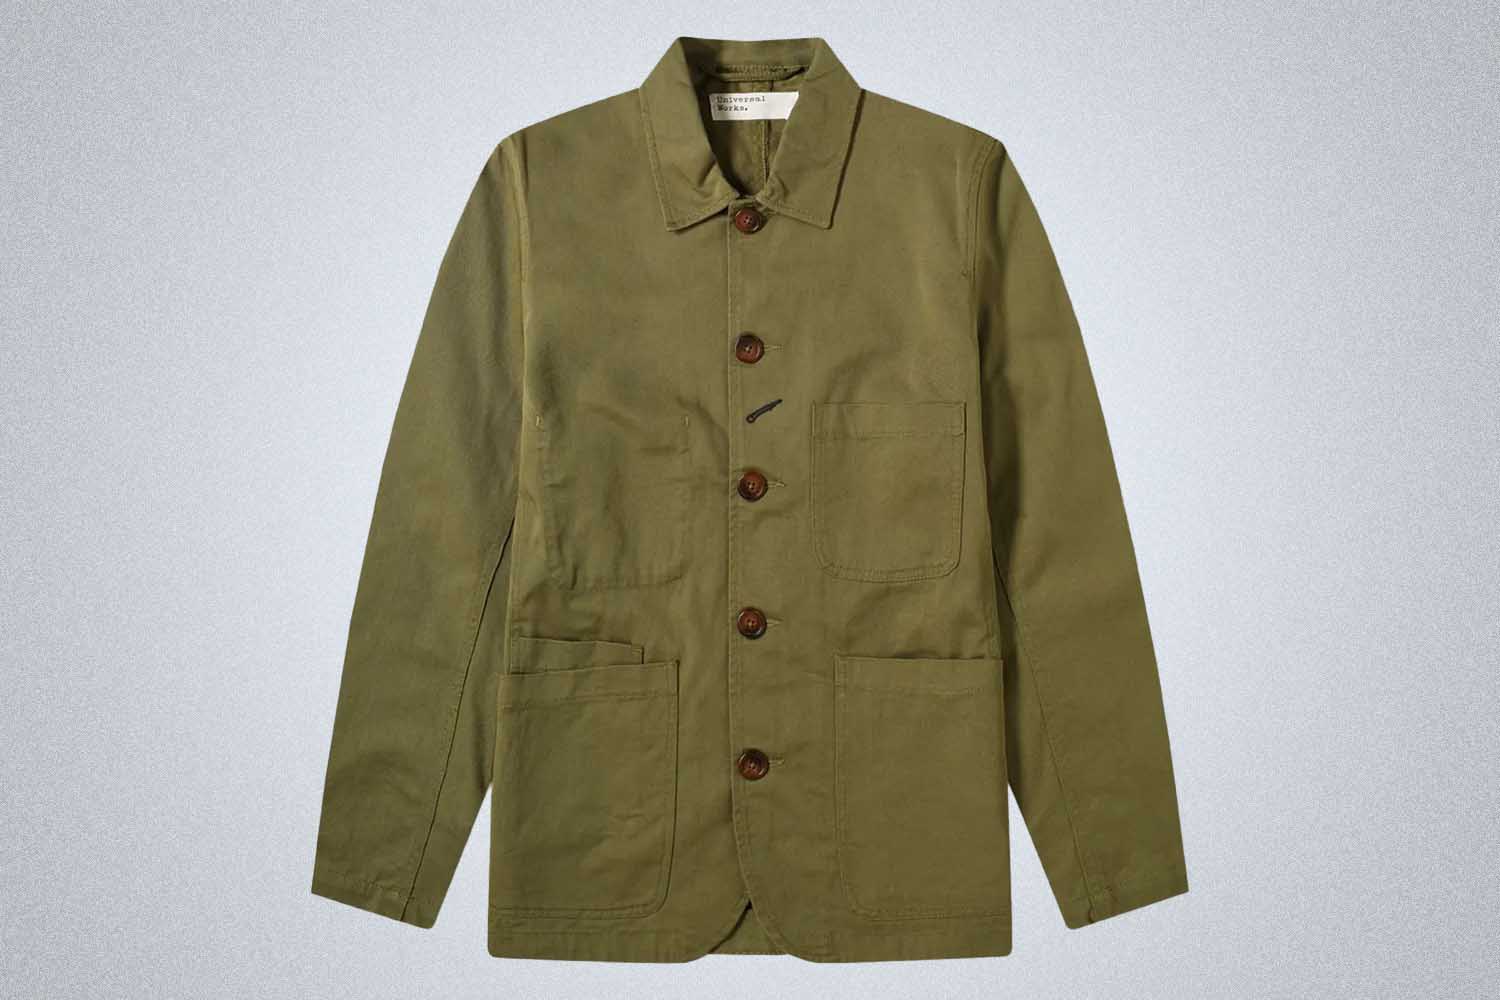 a green lightweight jacket from Universal Works on a grey background